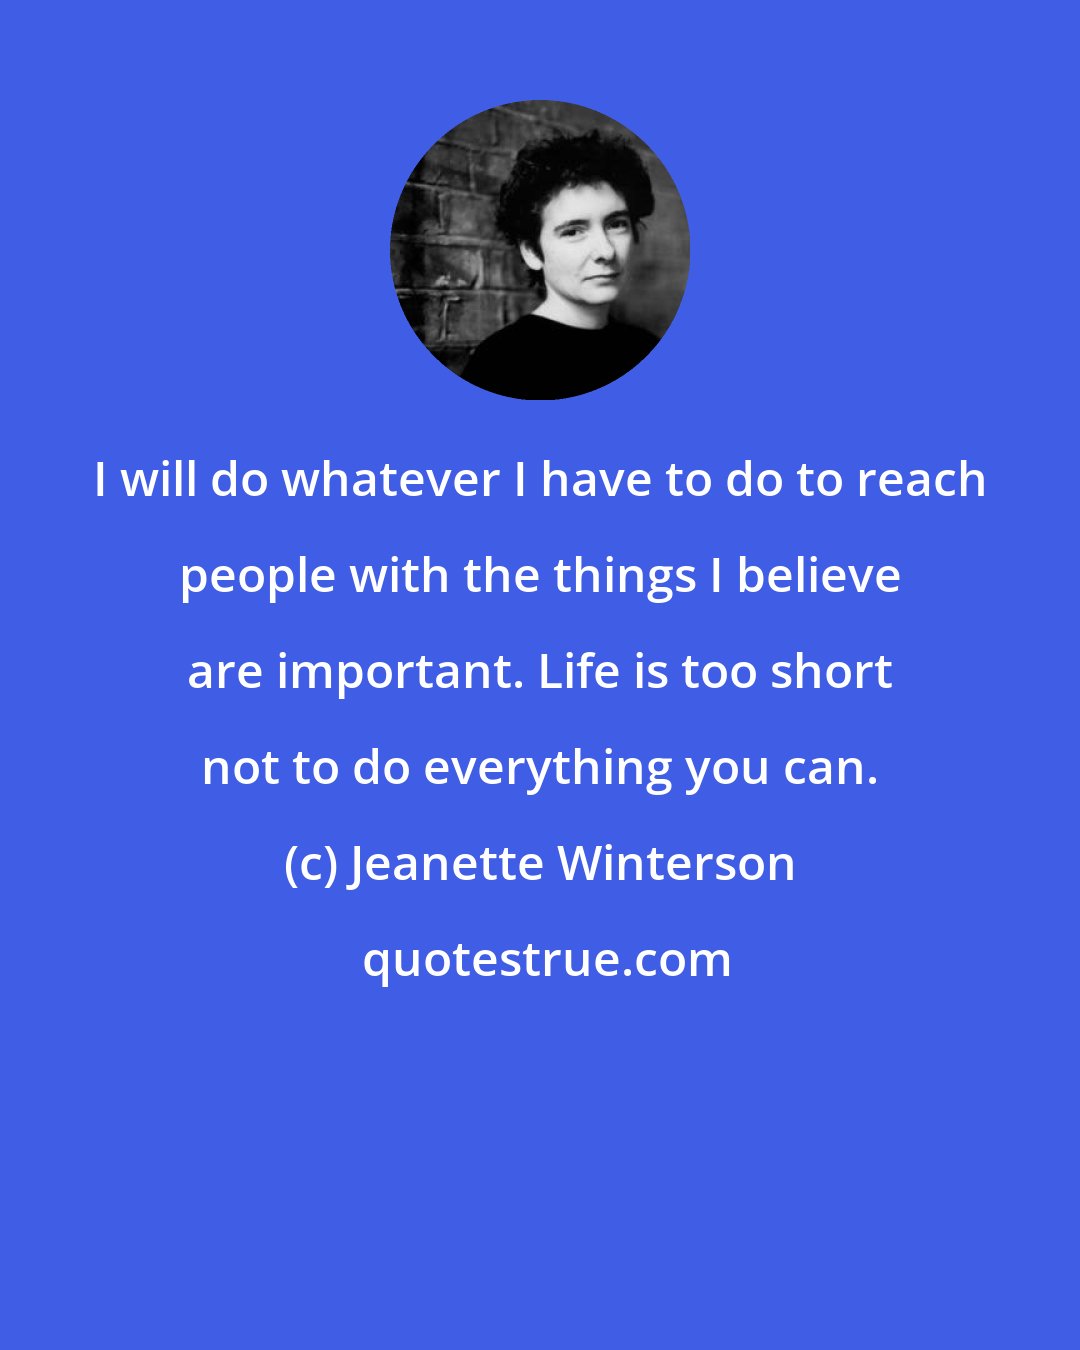 Jeanette Winterson: I will do whatever I have to do to reach people with the things I believe are important. Life is too short not to do everything you can.